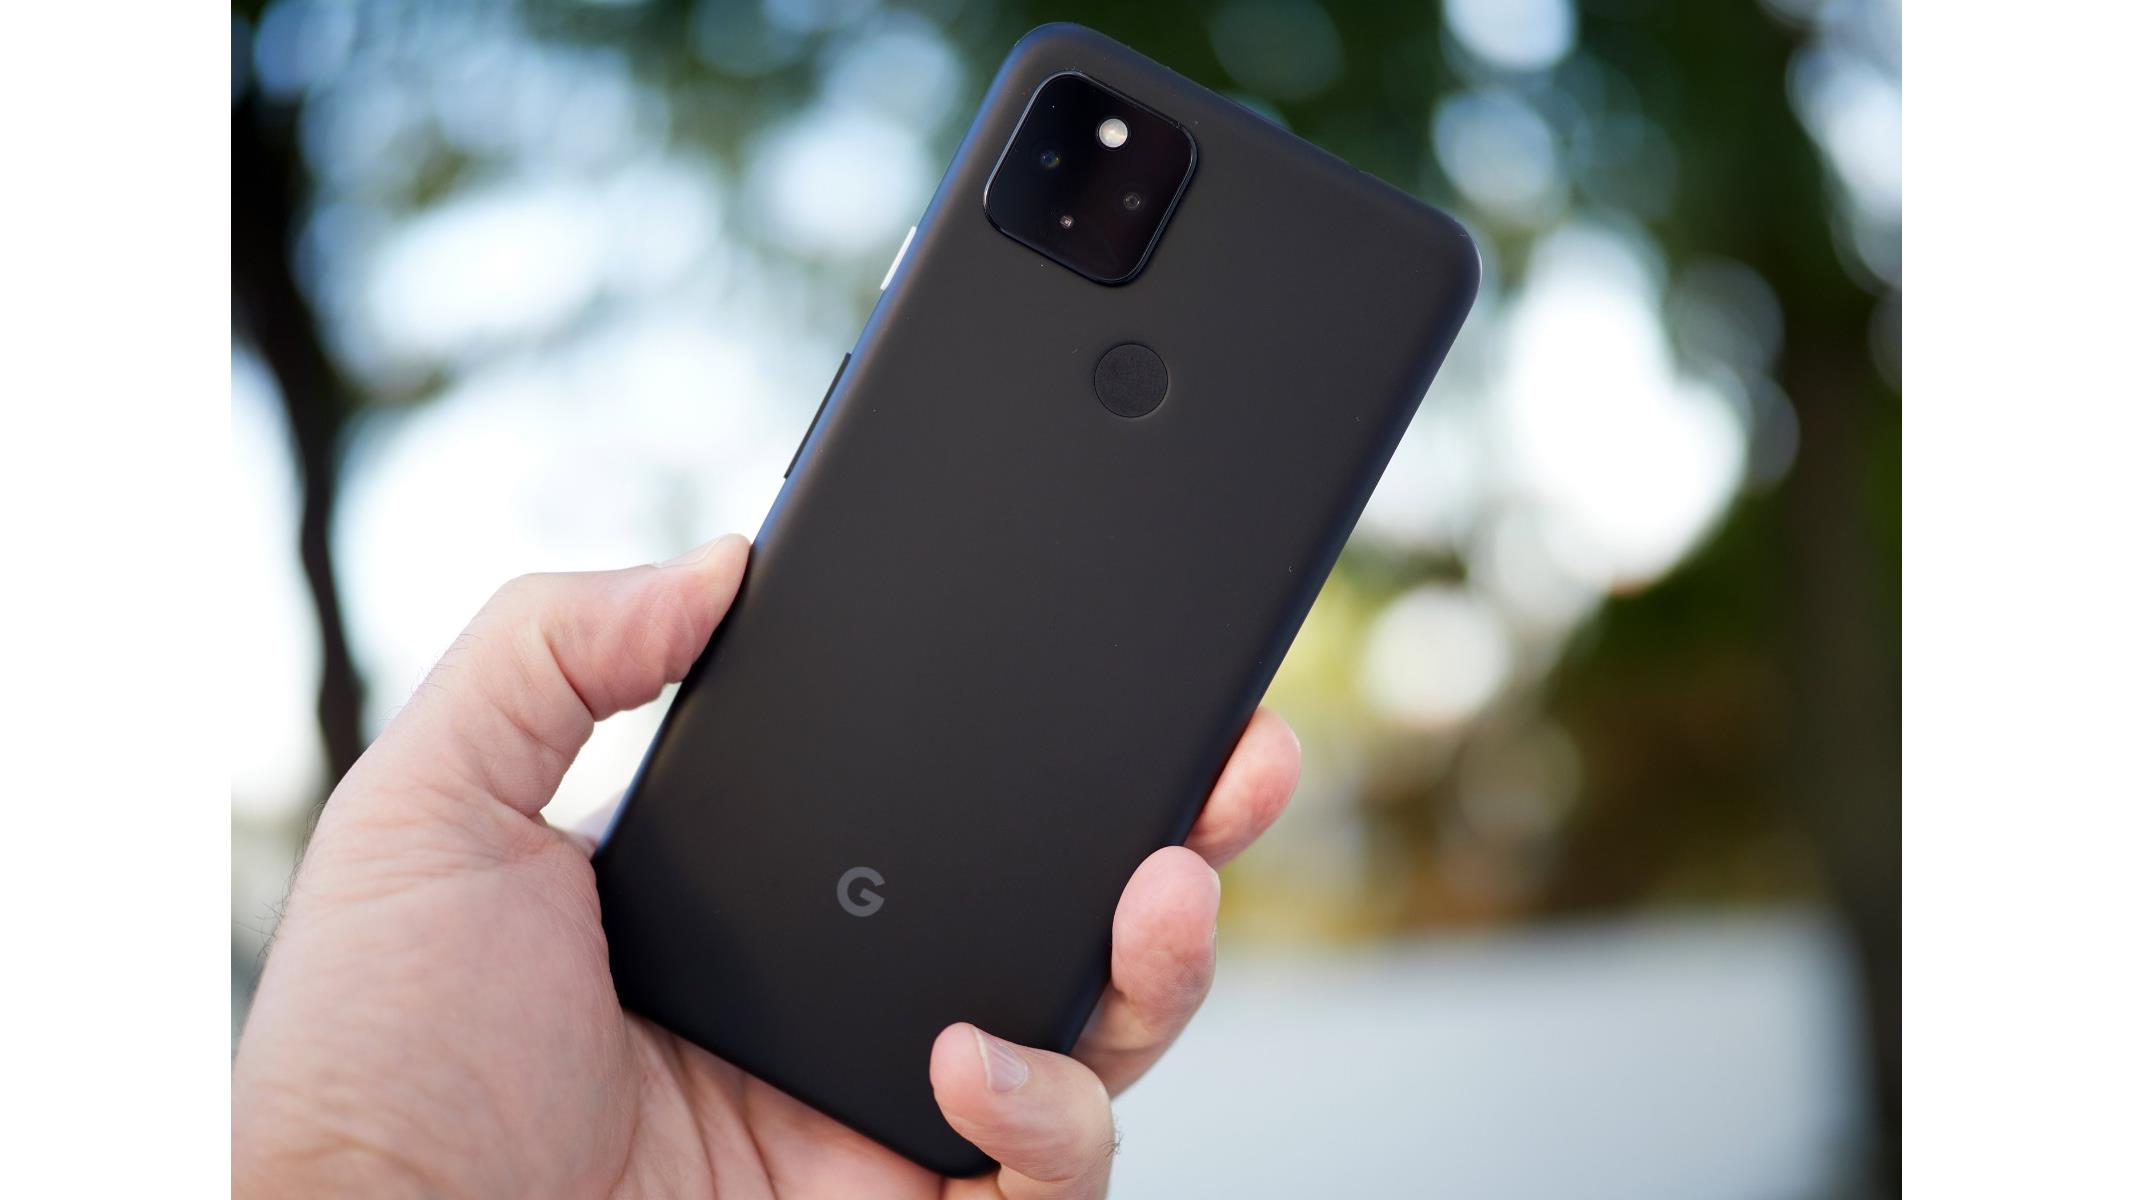 Google Pixel 4a 5G Review: Big Screen, Great Camera And Value 